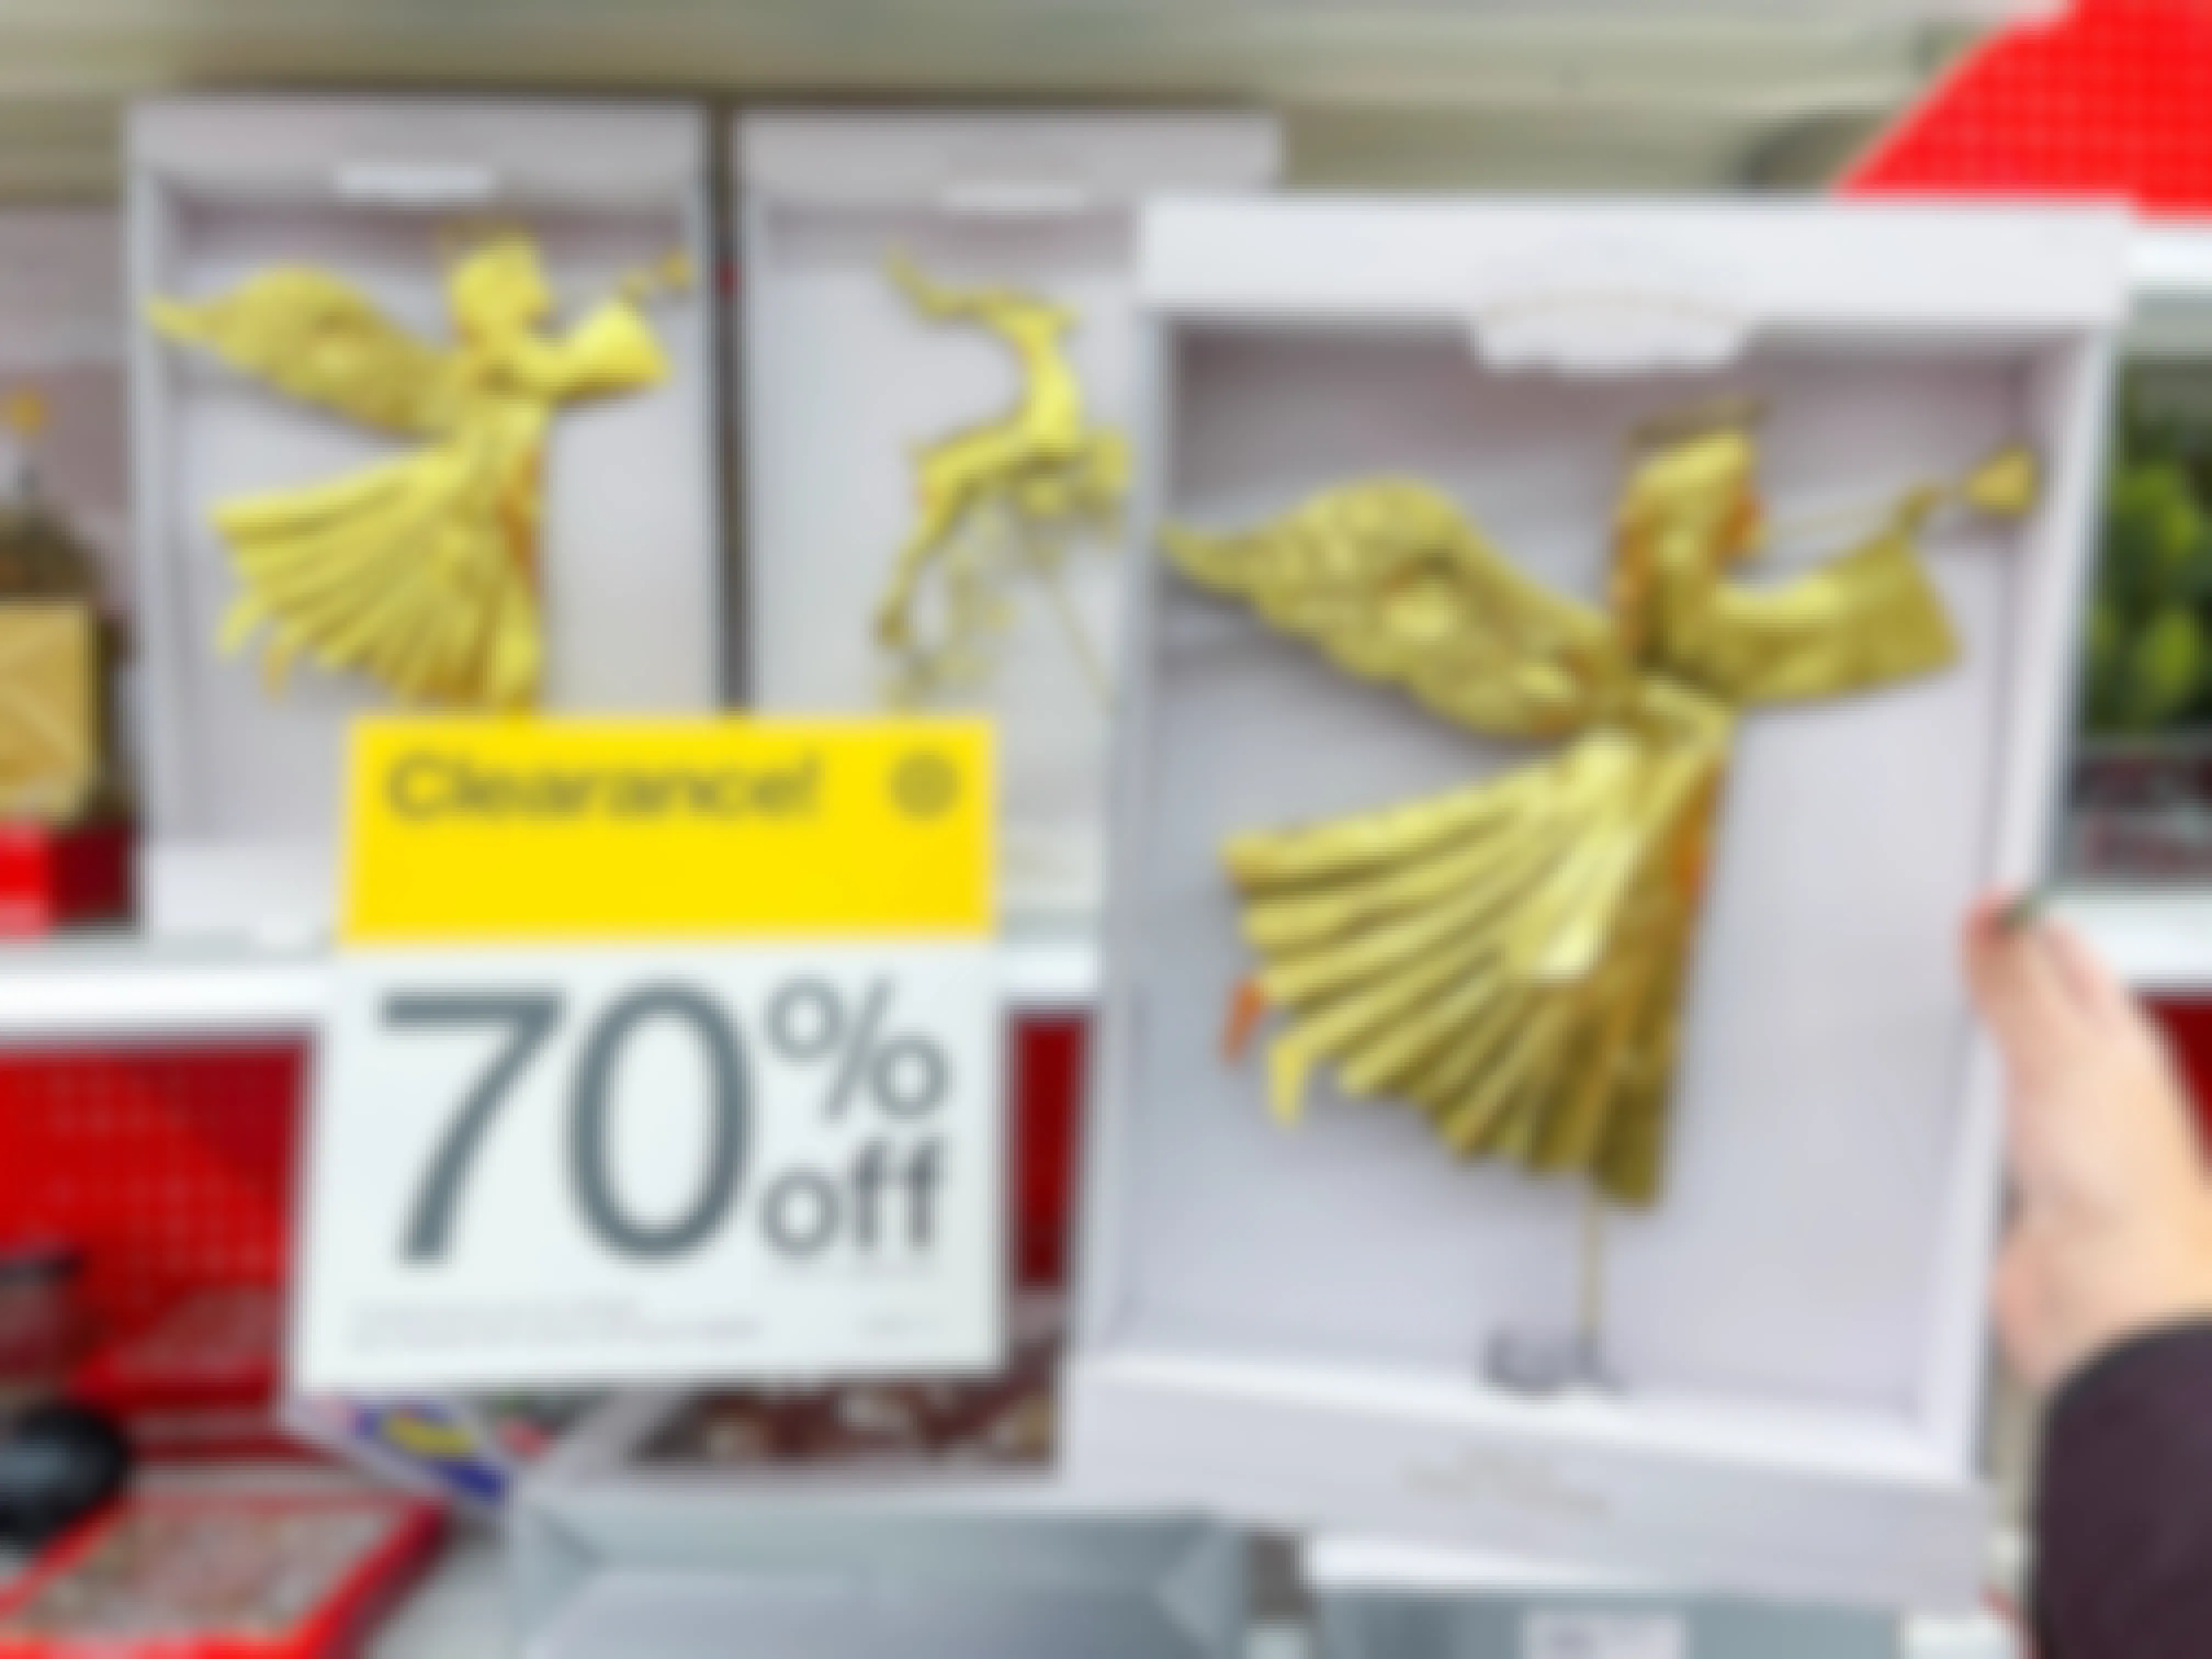 A person's hand holding up a Wondershop Christmas tree topper next to a sign that reads, "Clearance 70% off" on a shelf of Christmas decor at Target.